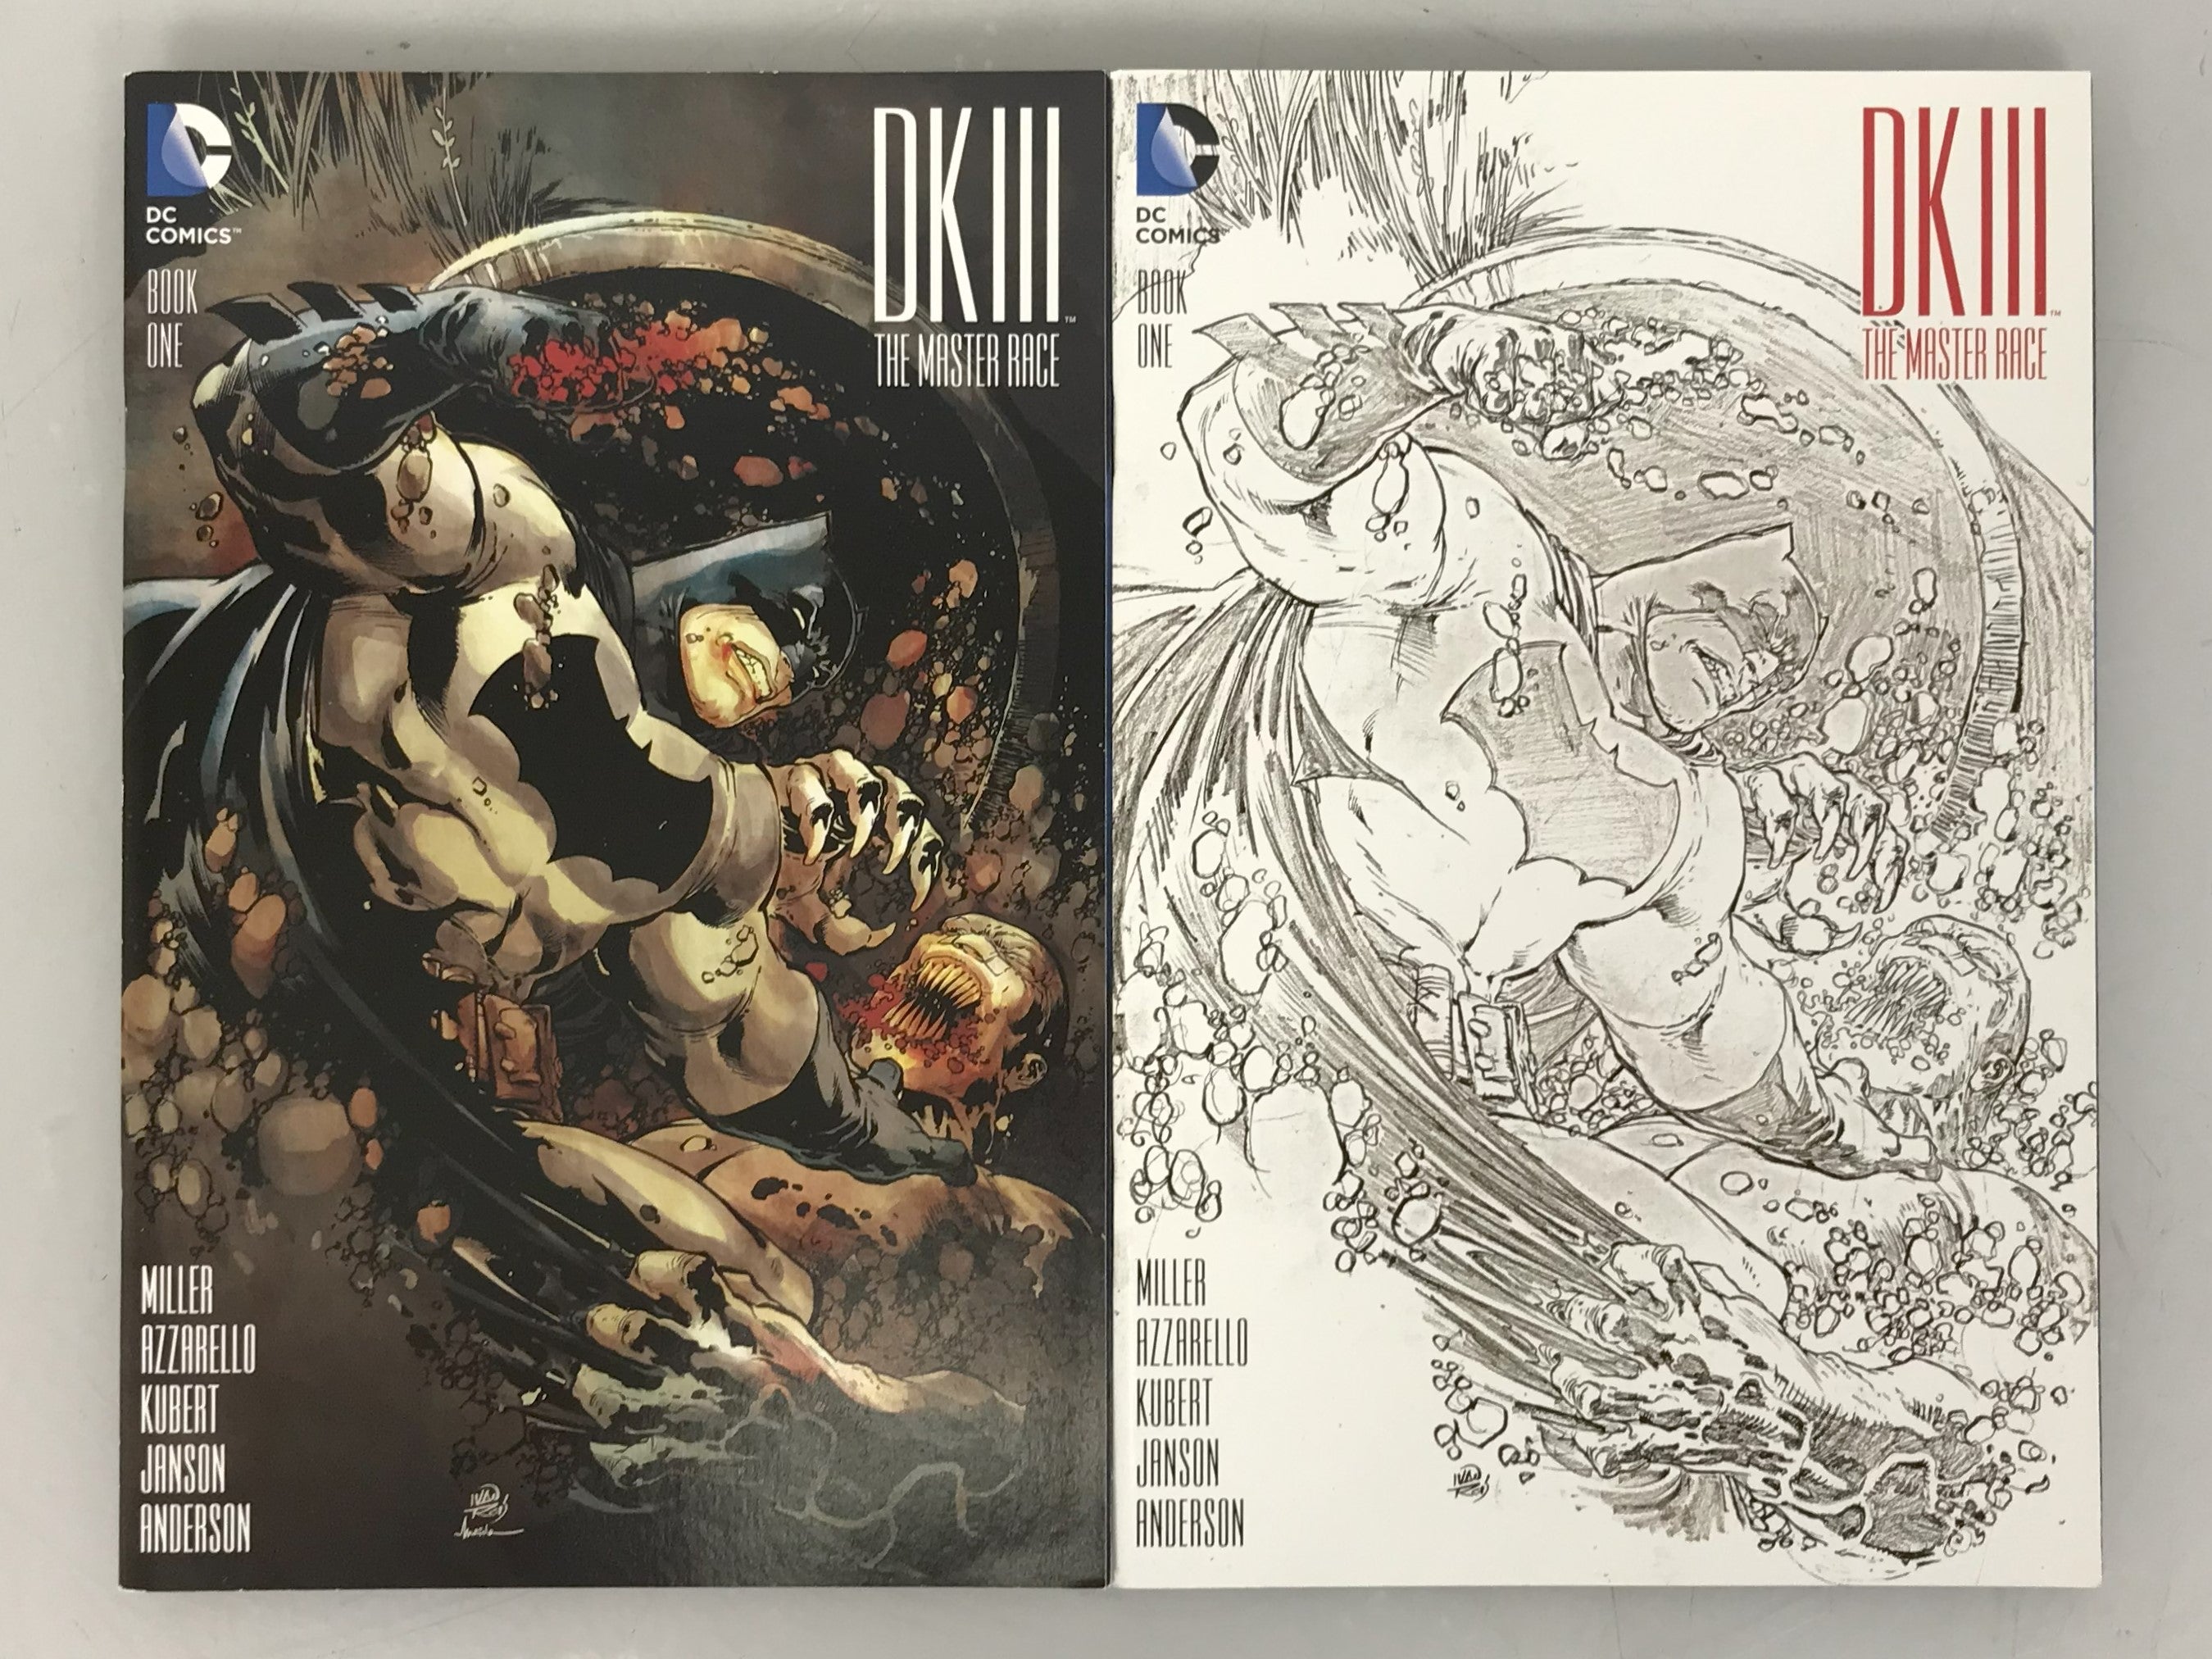 Lot of 2 Dark Knight III: The Master Race 1 2016 Variant Covers